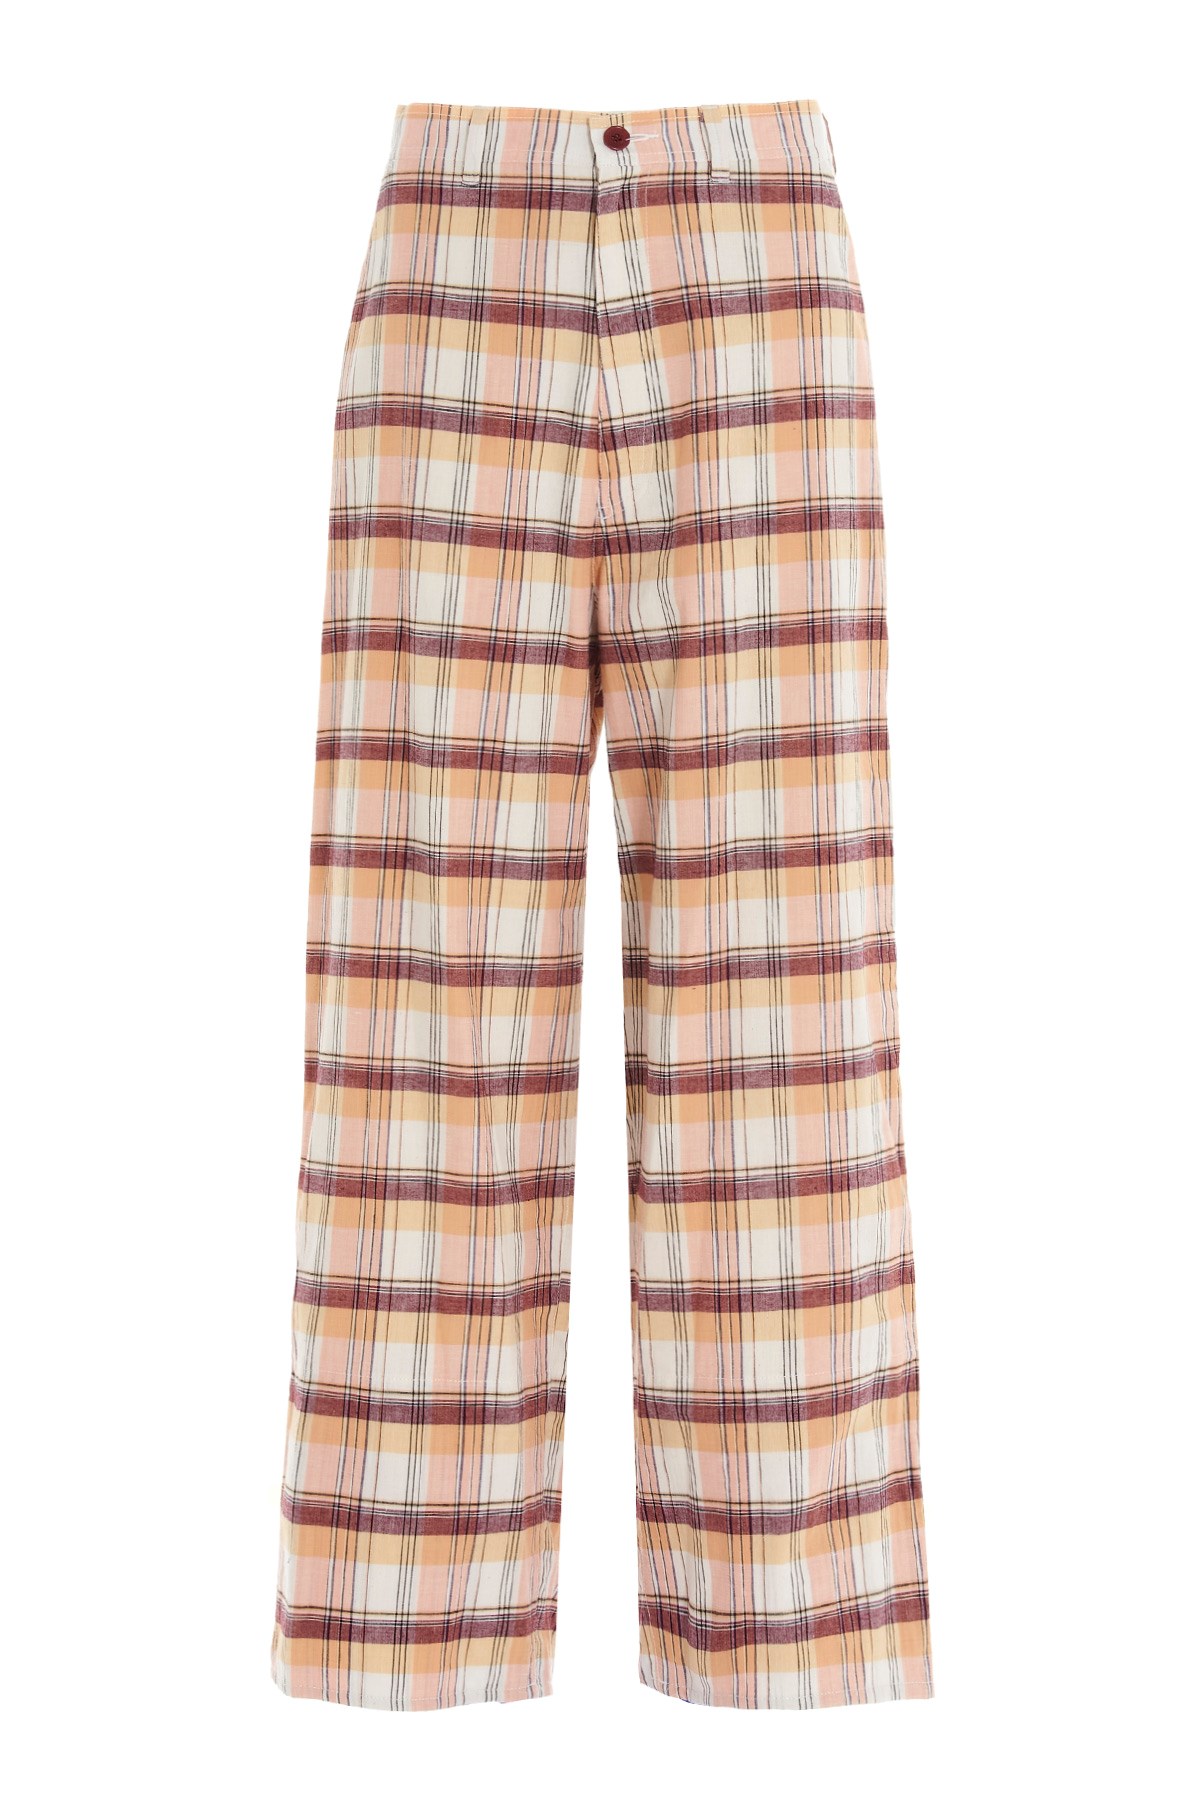 UNDERCOVER Check Cotton Trousers